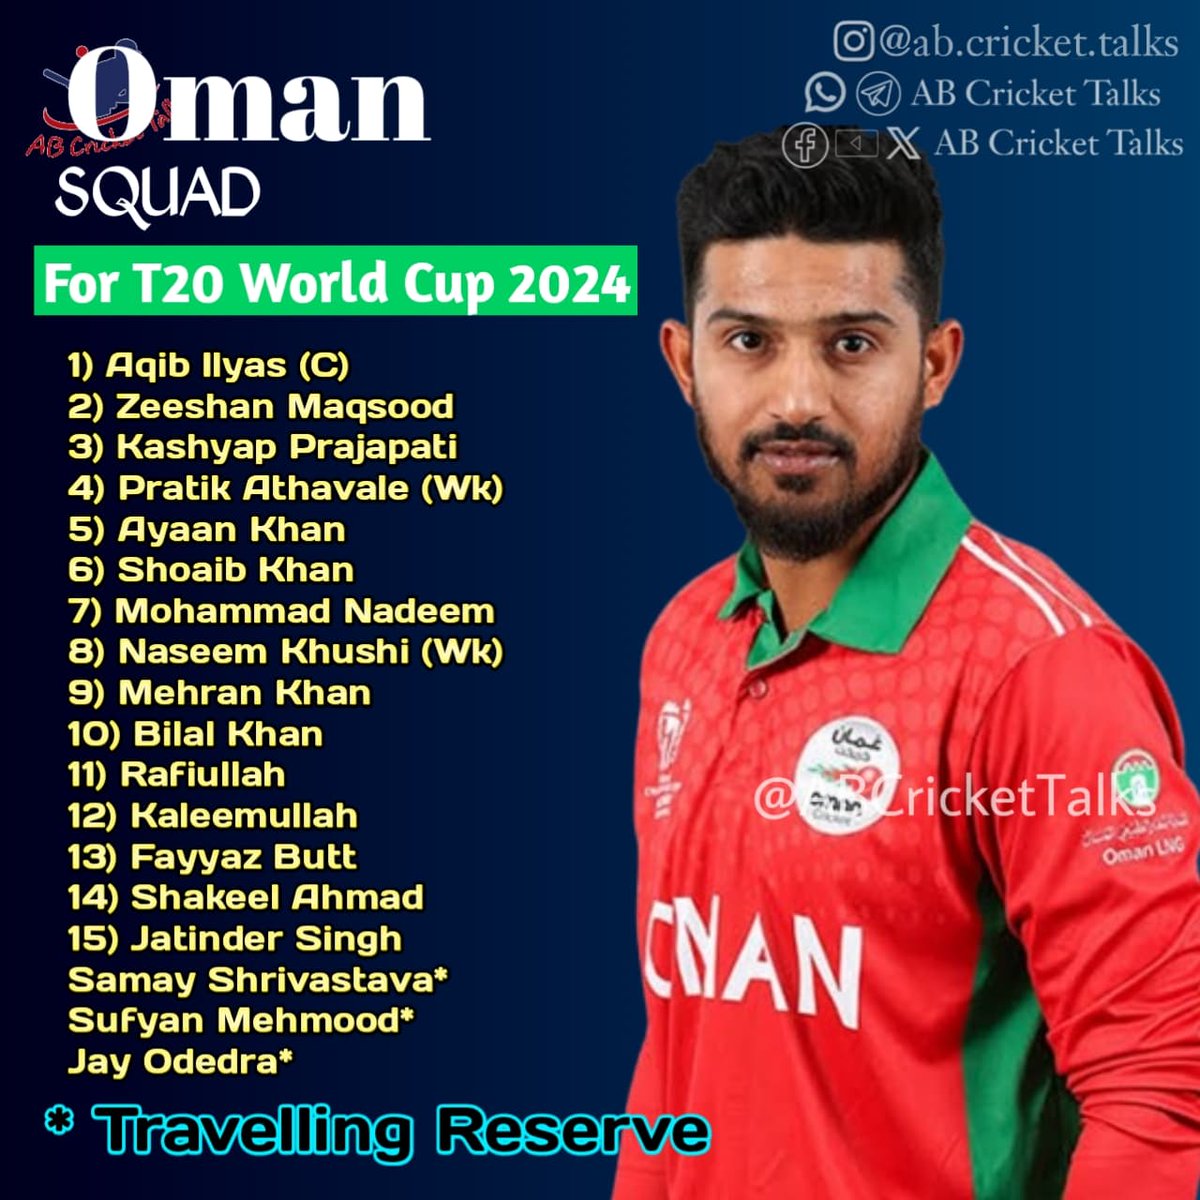 Here is the squad of Oman Cricket Team for the upcomming T20 World Cup
#ABCricketTalks #CricketTalksWithArpit 

#T20WorldCup24 #T20WorldCupSquad #Oman